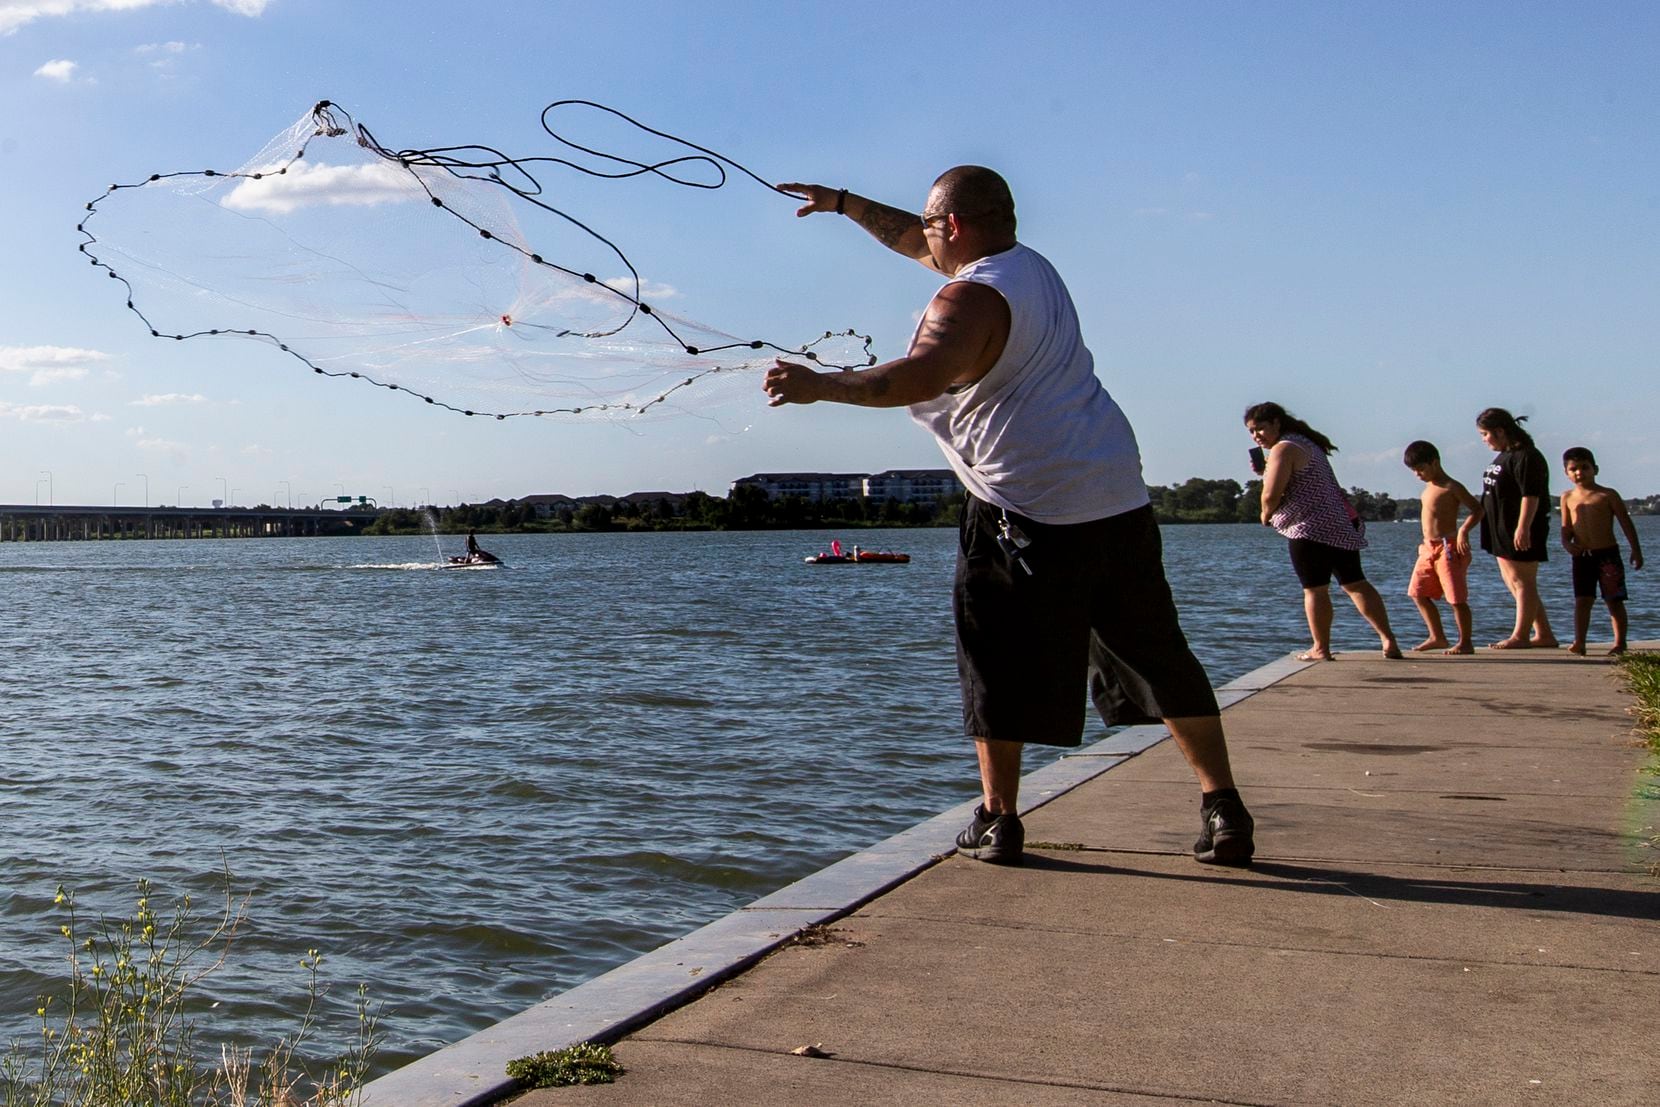 A fisherman, who wished to remain unidentified, casts a net at the John Paul Jones Park along Lake Ray Hubbard in Garland, Texas, on Saturday, July 18, 2020.